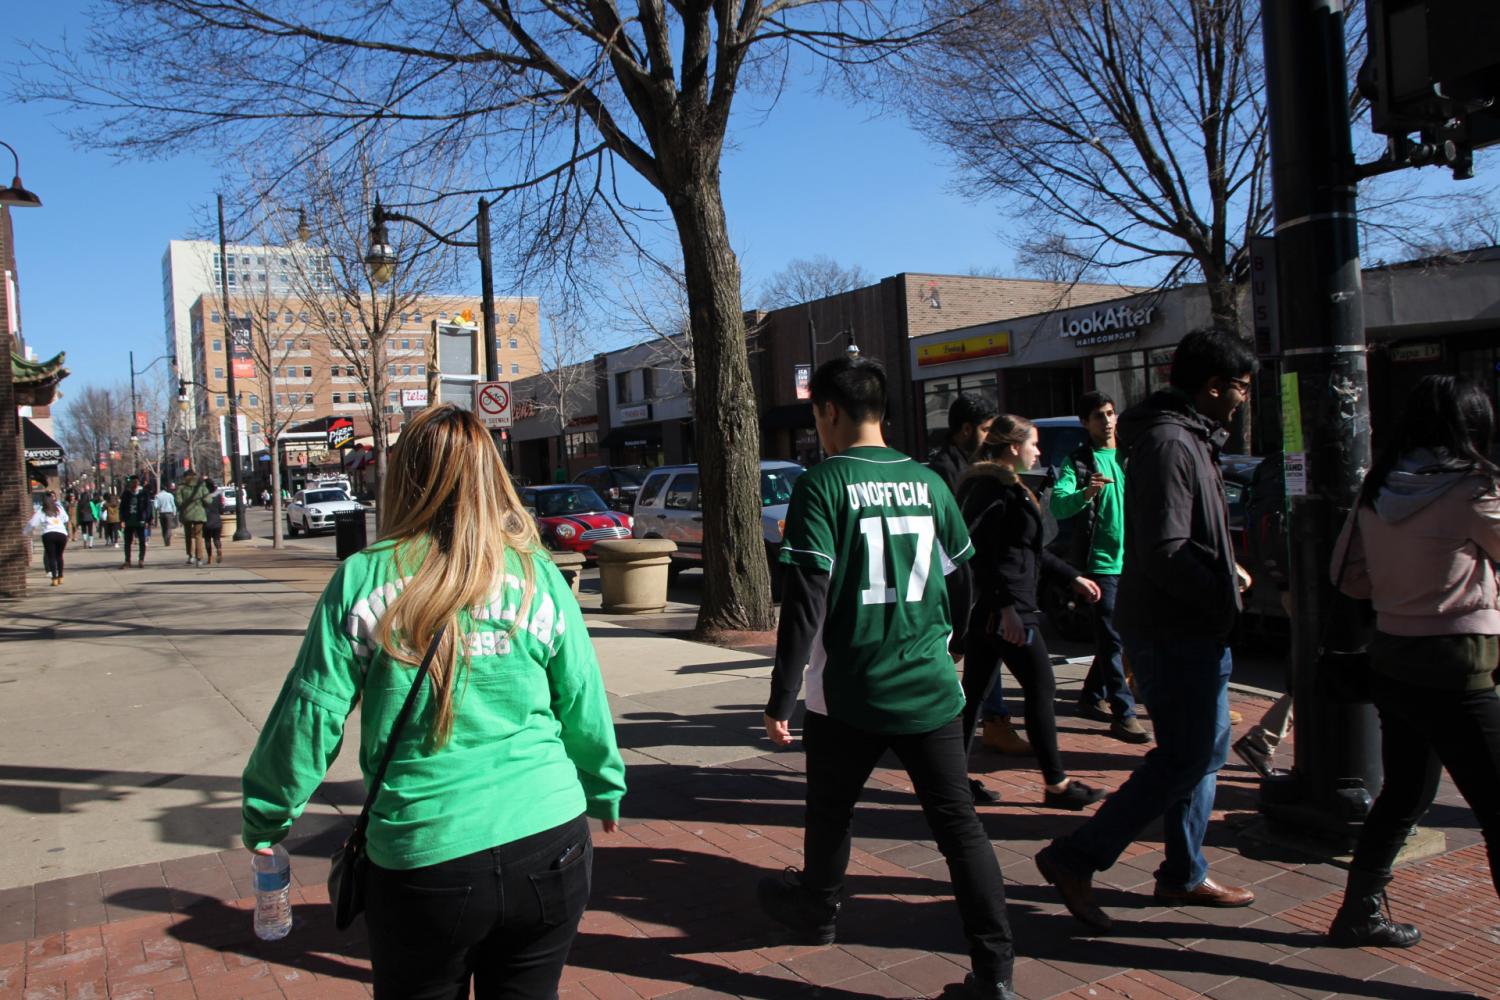 Students on Green Street during Unoffical St. Patricks Day. In 2015, the University was ranked the No. 1 party school by the Princeton Review, and in 2016 it was ranked No. 3. The University is now ranked No. 14. The ranking is based on a survey of 80 questions and is filled out by 137,000 students from 382 schools. 